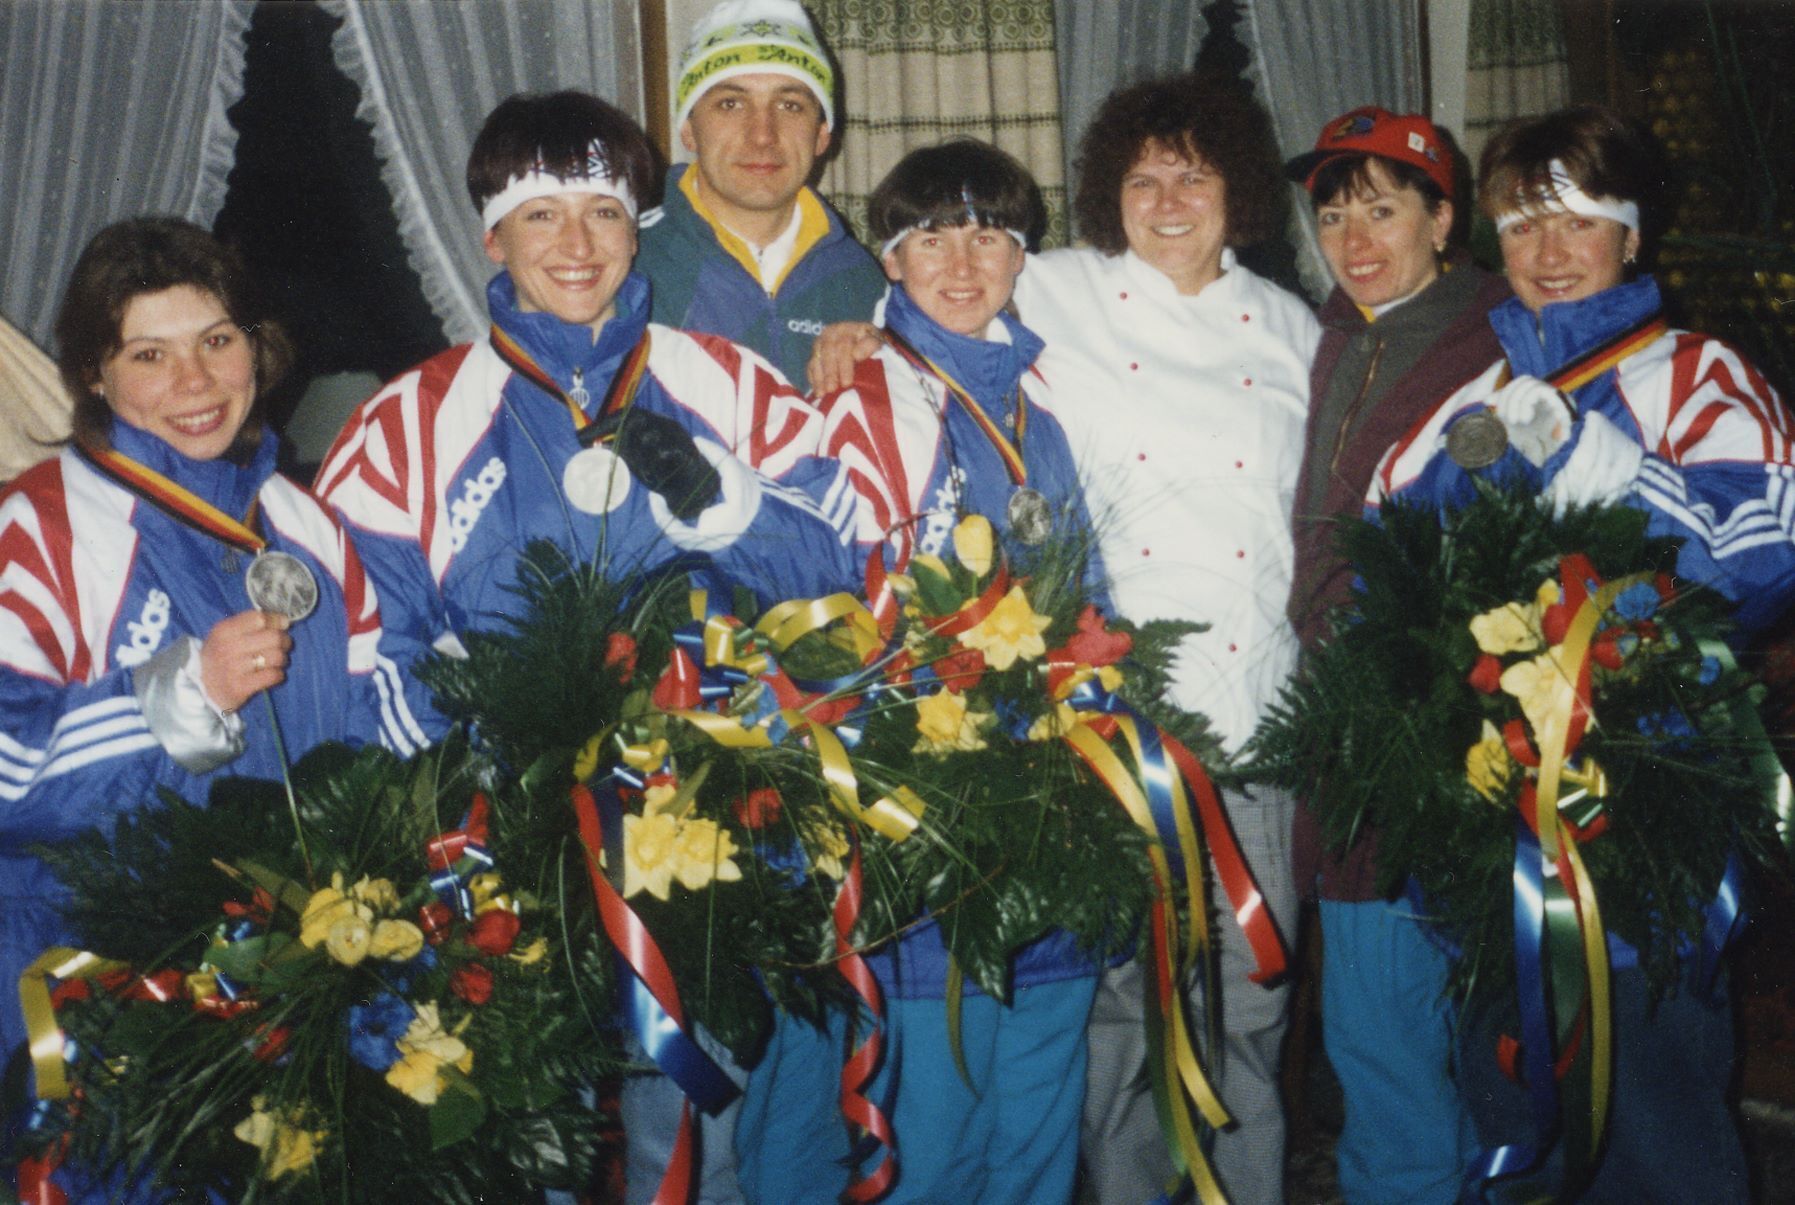 A Ukrainian woman won her historic biathlon medal in someone else's shoes and after her opponent fell: 30 years of our first independent Olympic medal